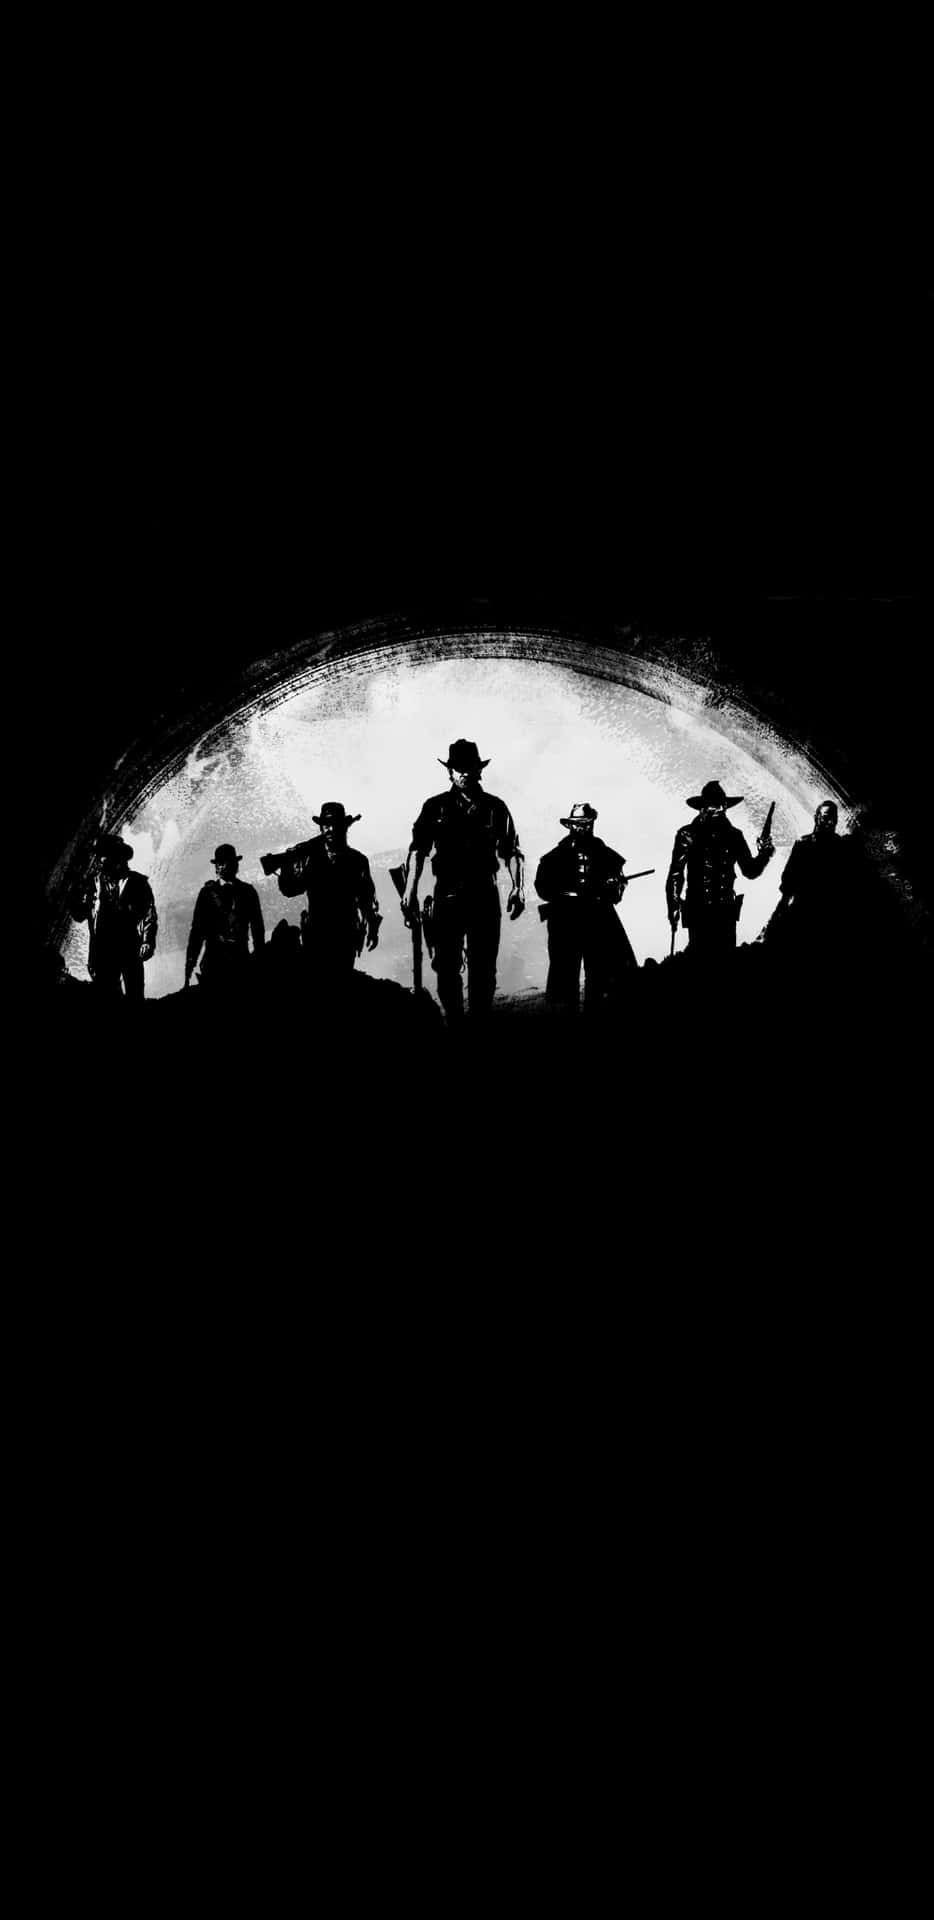 the silhouette of a group of people in silhouette